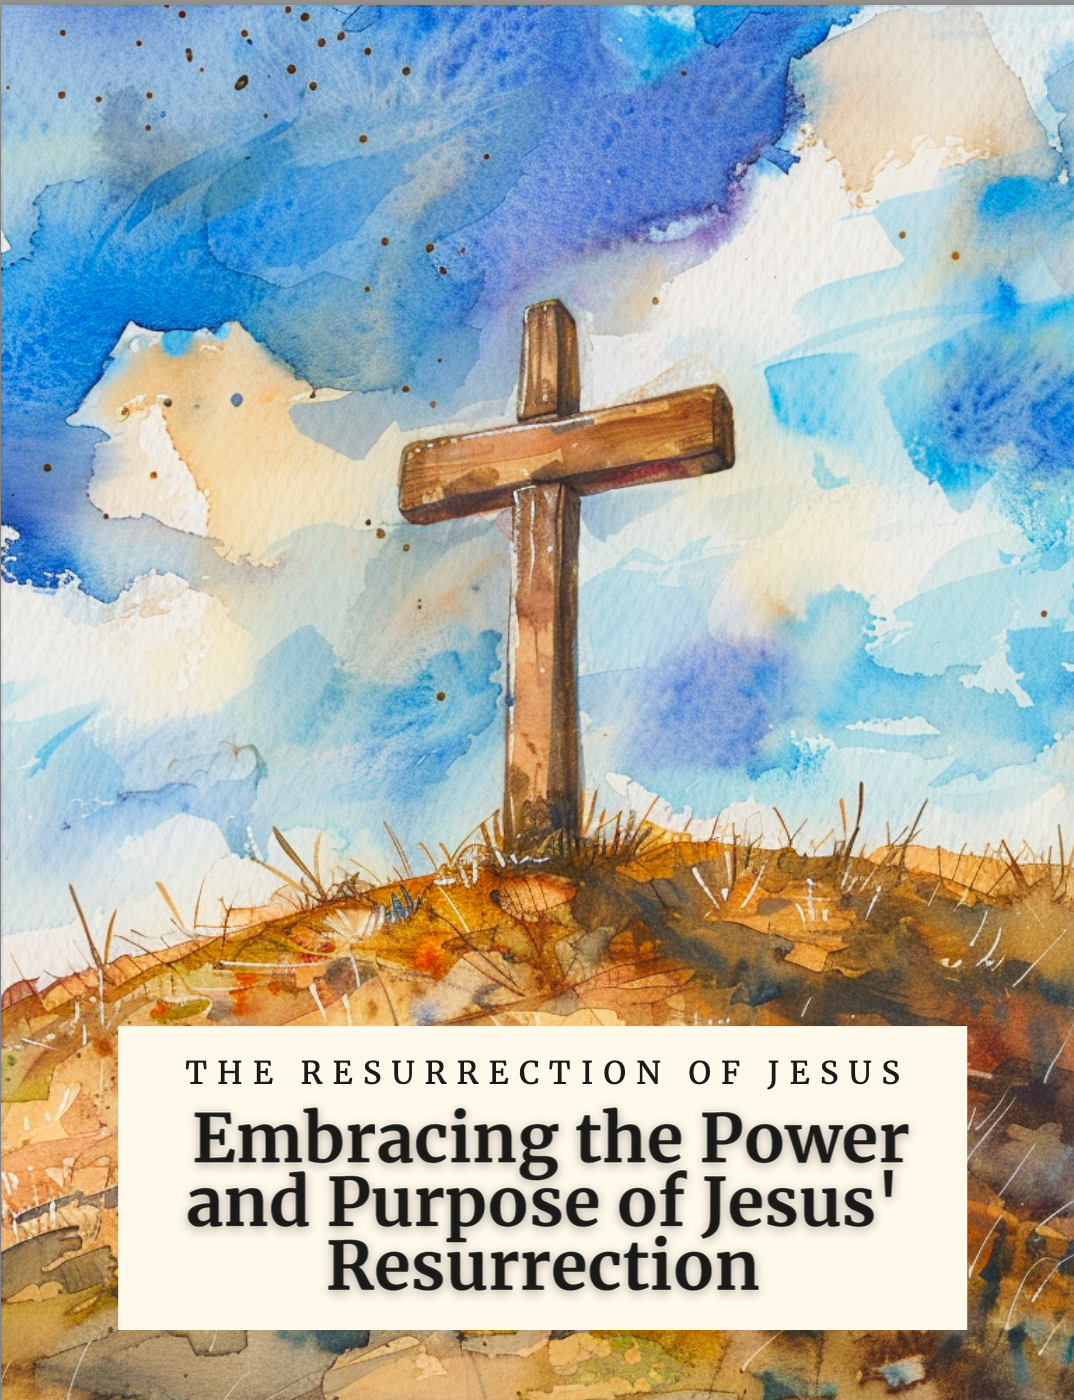 Resurrection of Jesus Christ: Mini-Bible Study with Reflection & Journaling Features